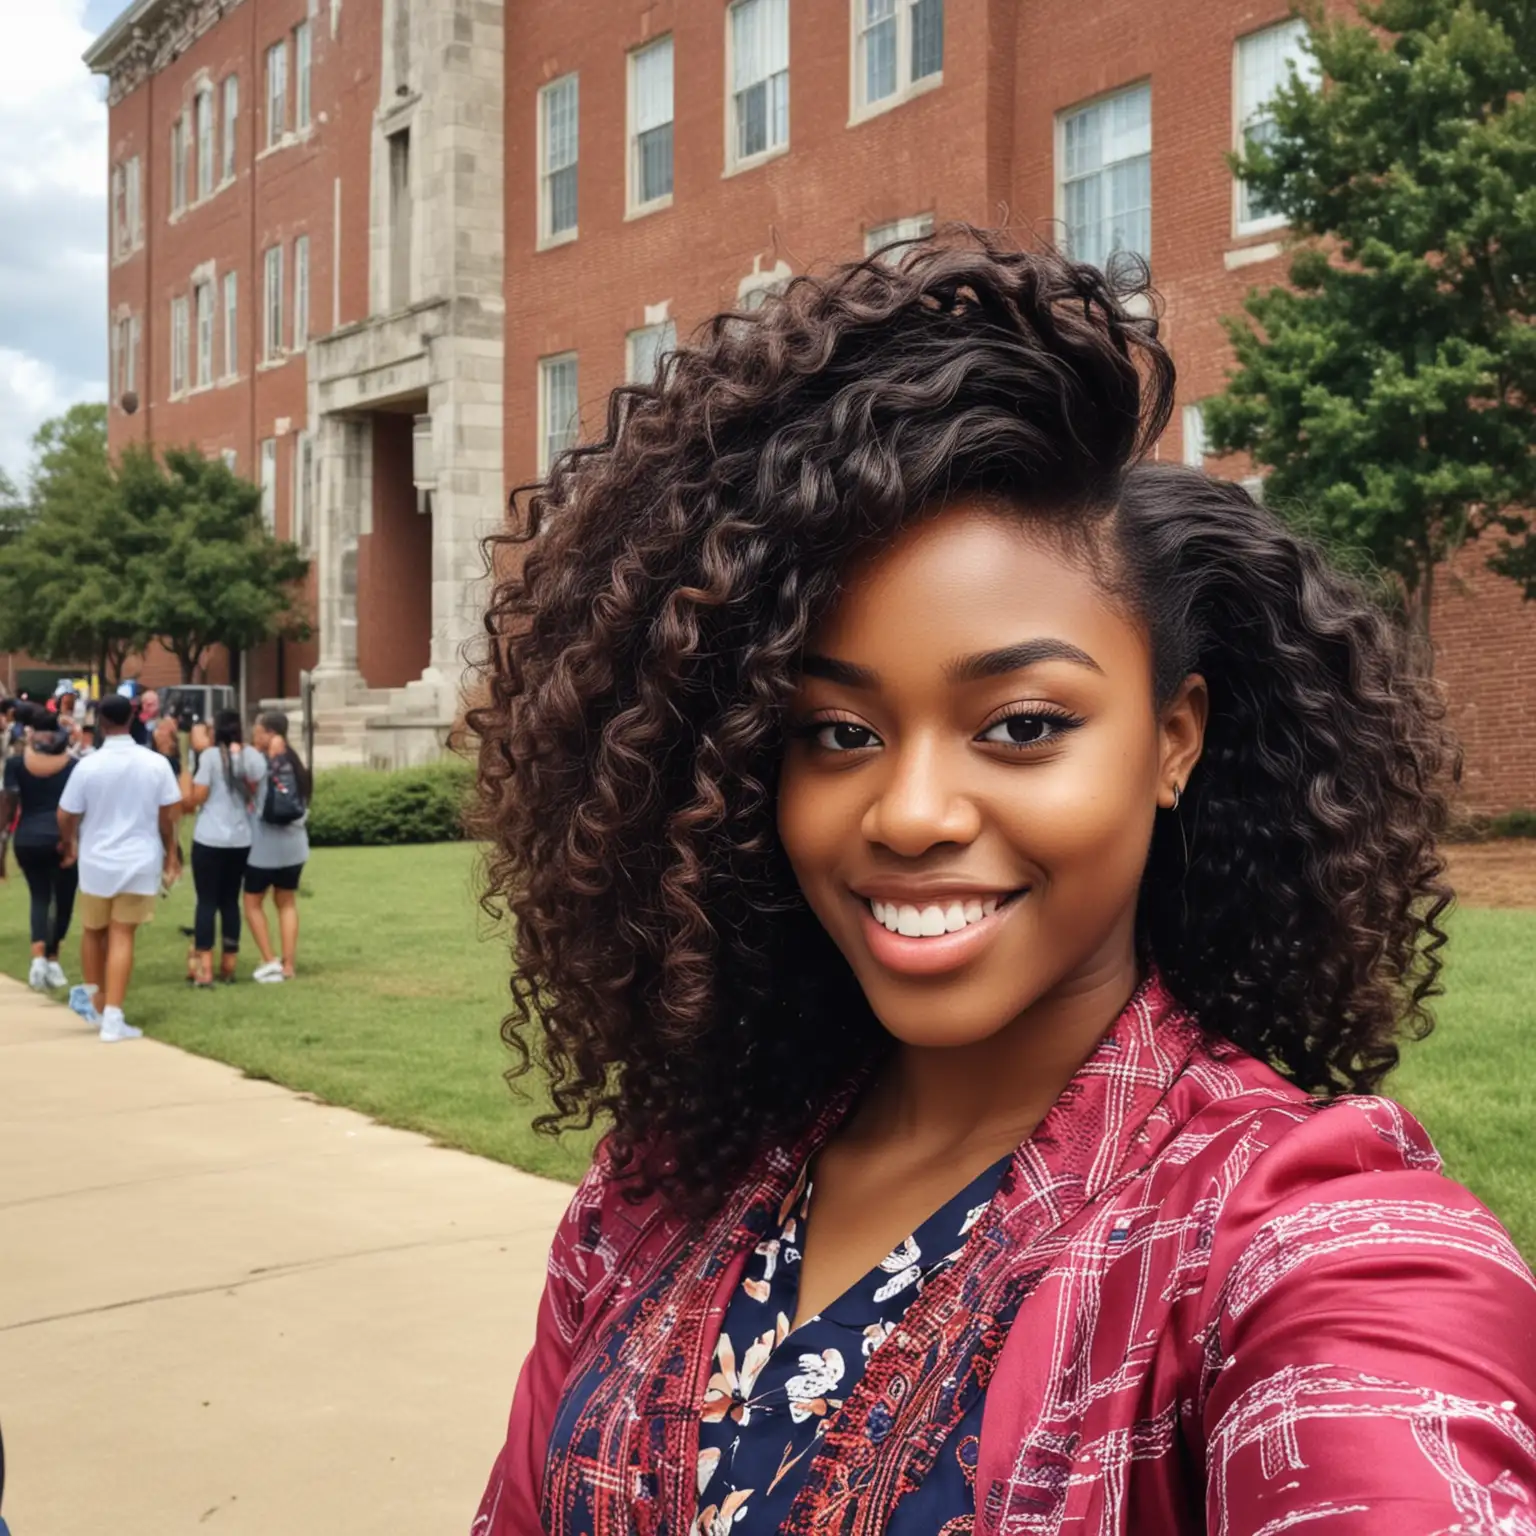 Cheerful African American Woman Capturing Selfie Moments at University Homecoming